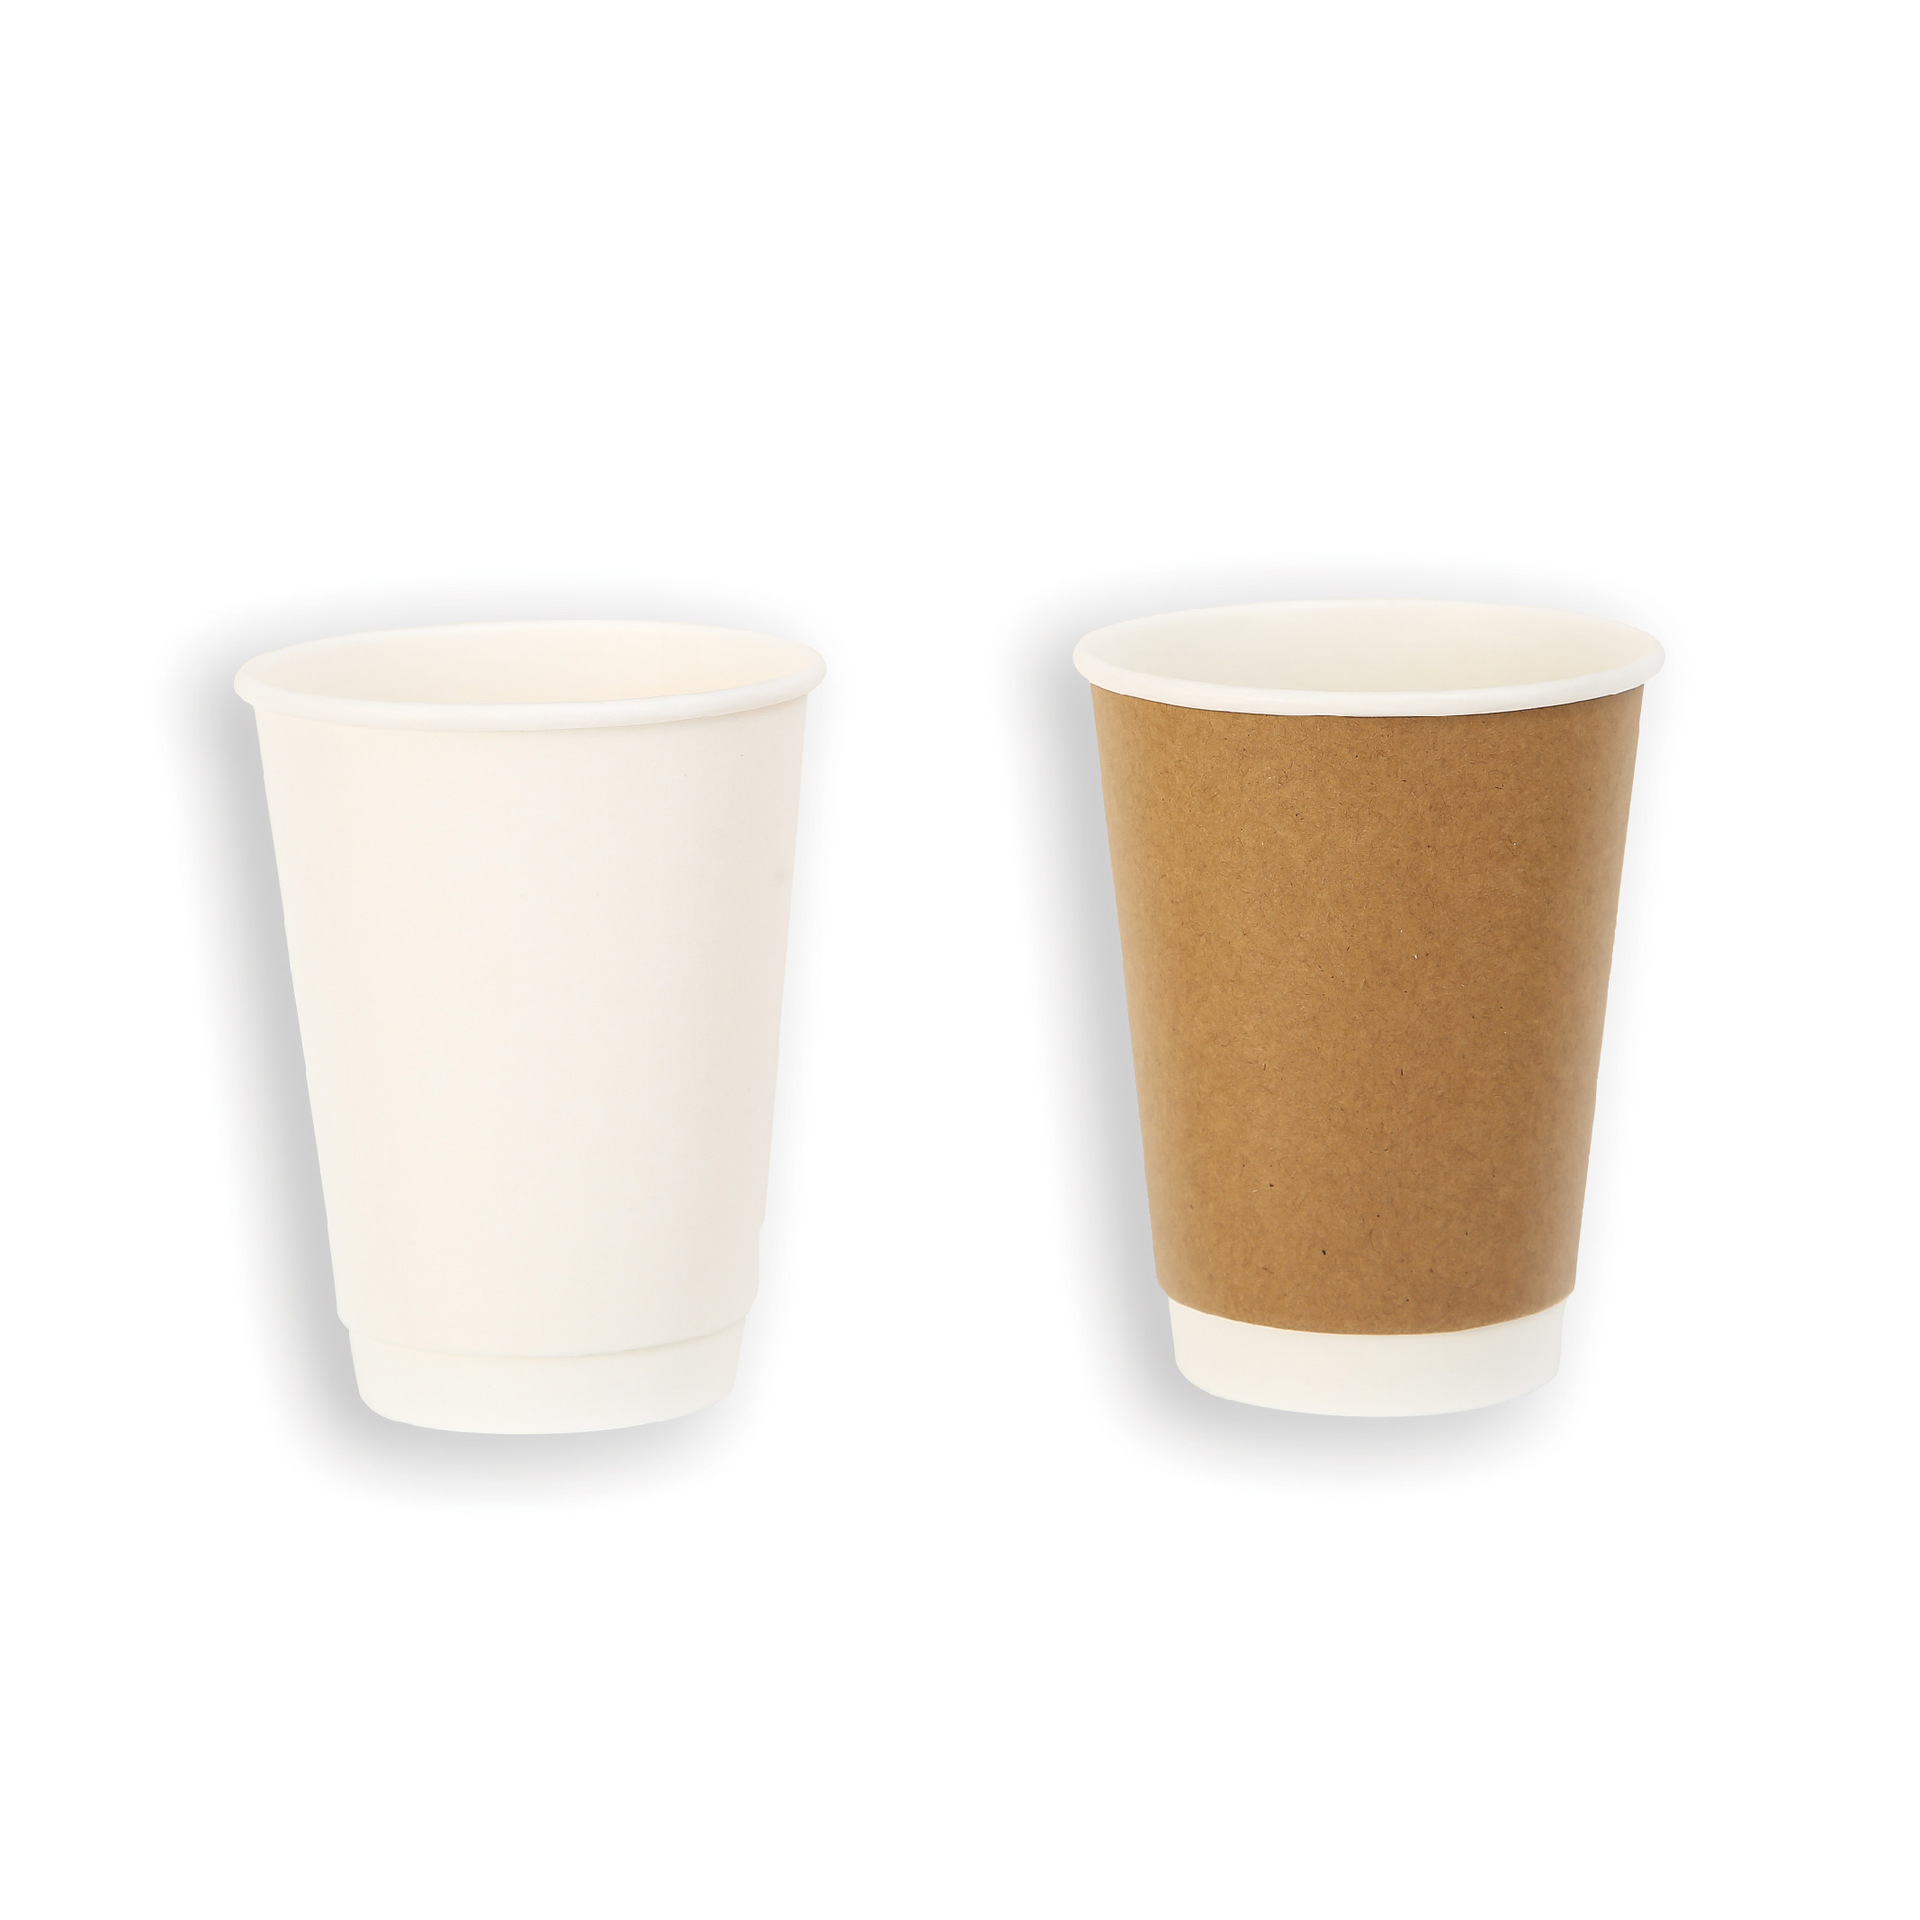 Disposable Milk Tea Paper Cup Thickened Insulated Hot Drink with Lid Hollow Cup Coffee Cup Kraft Paper Milk Tea Paper Cup Formulation